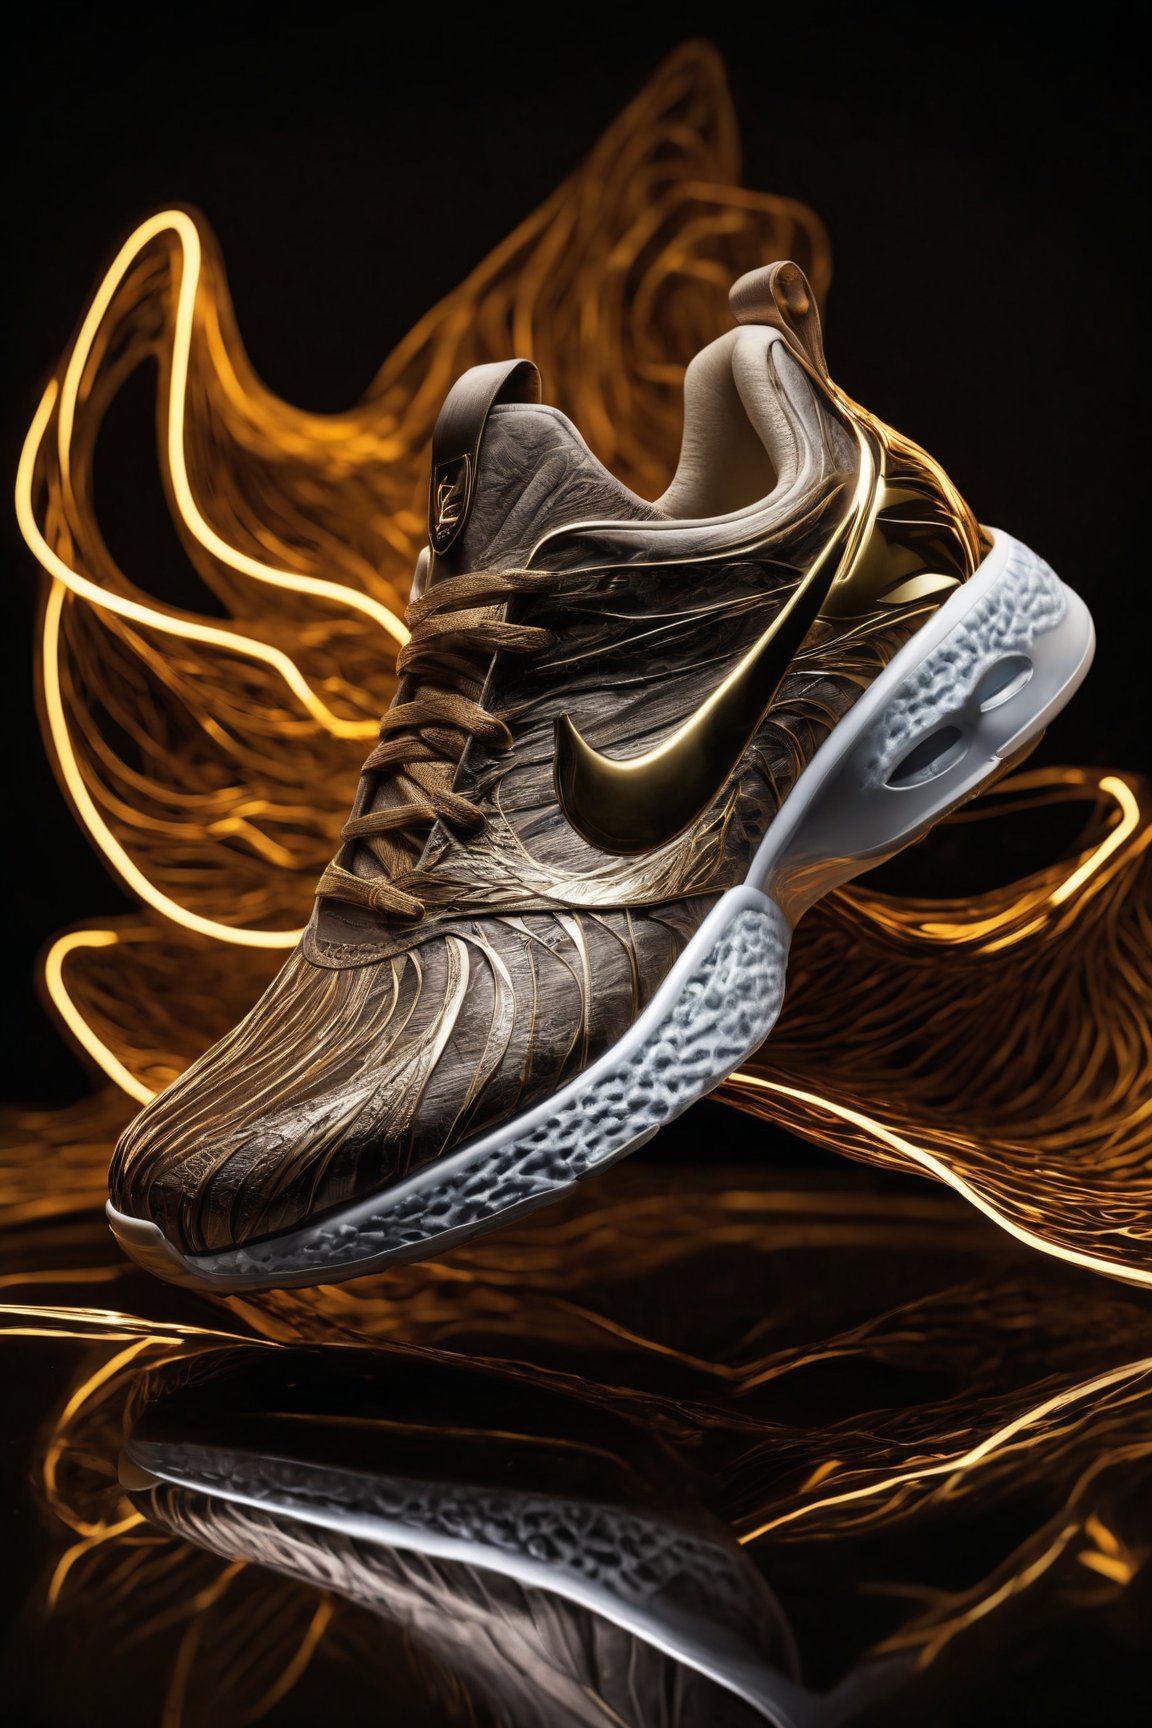 (best quality,8K,highres,masterpiece), ultra-detailed studio photography featuring a cutting-edge sneakers design. The image showcases sneakers enveloped in dynamic electricity waves, evoking a sense of energy and innovation. A subtle smokey effect adds depth and mystique to the scene, enhancing the visual impact of the design. The studio environment provides a controlled setting to highlight the intricate details of the sneakers, allowing their craftsmanship to shine. This artwork captures the fusion of technology and style in sneaker design, presenting a visually captivating composition that is both modern and impactful.